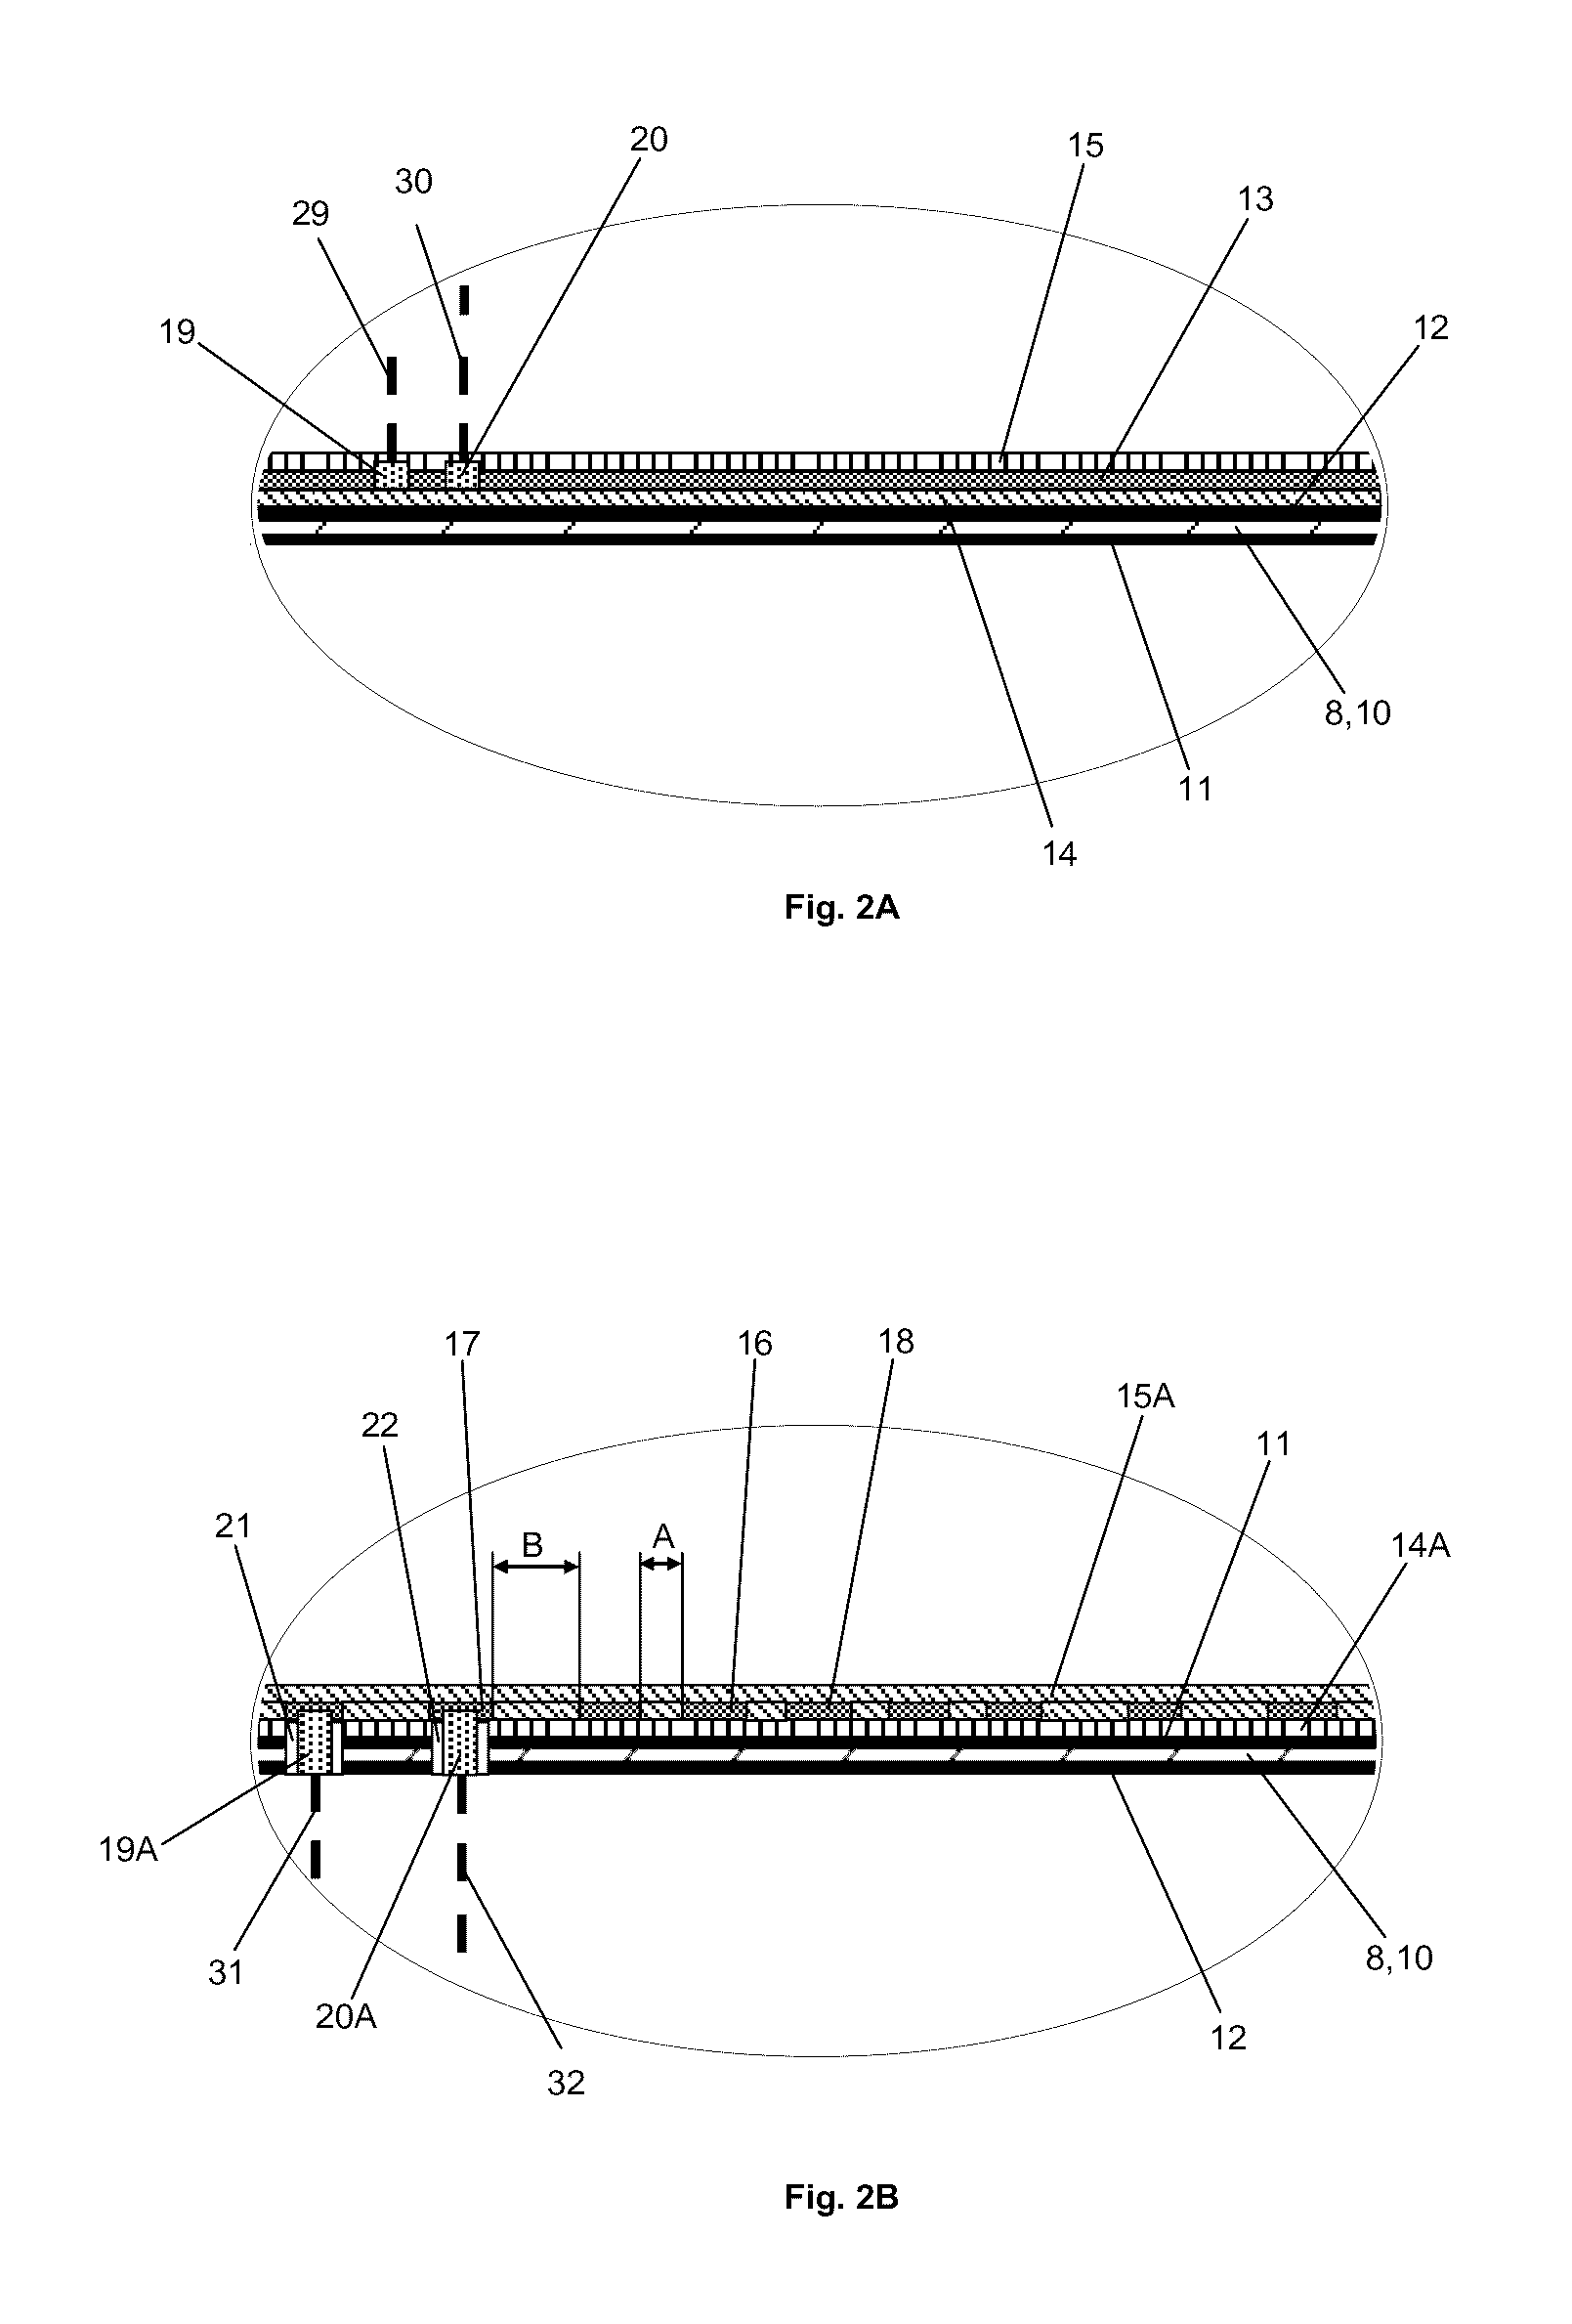 Treatment chamber for treating surgical or dental instruments with electrical energy using chamber wall made of thin film or thick film